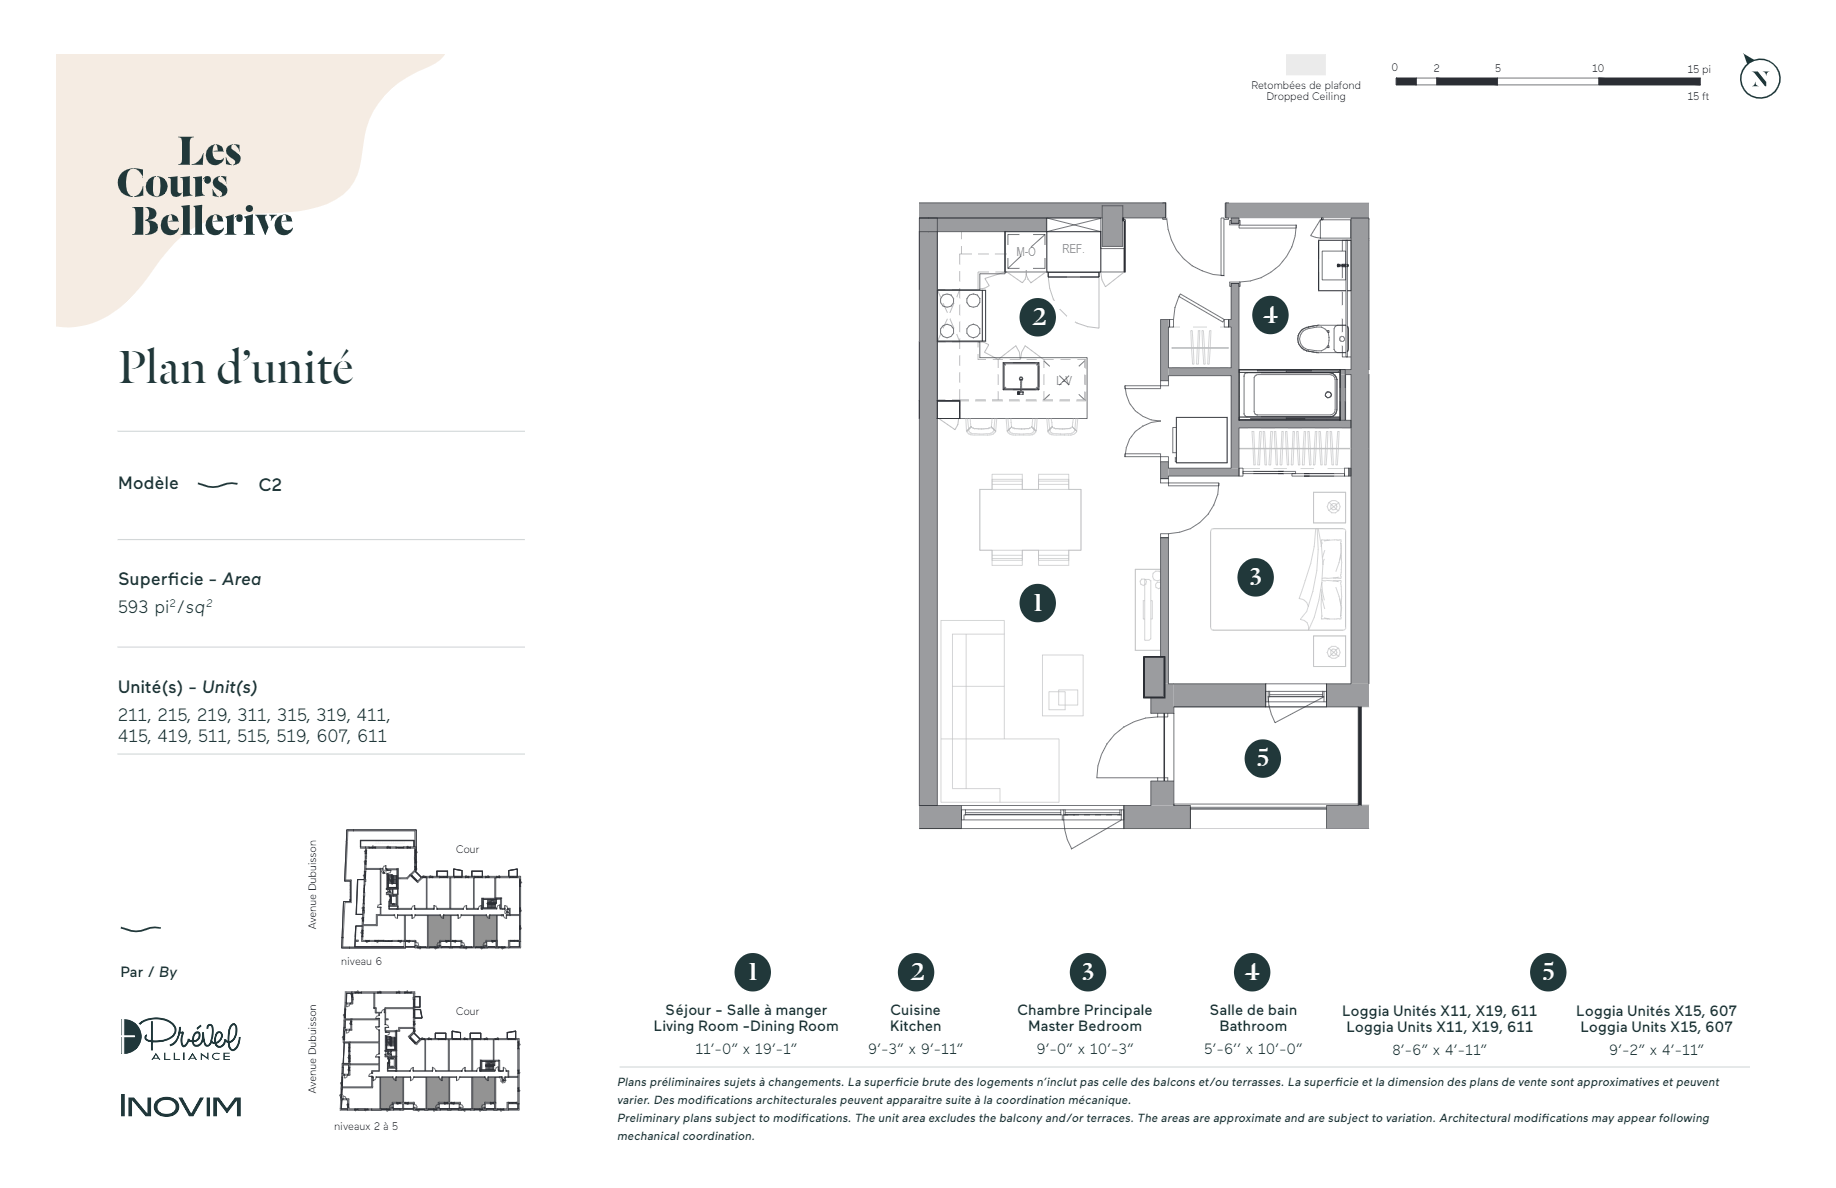  Floor Plan of Les Cours Bellerive - Phase 2 with undefined beds